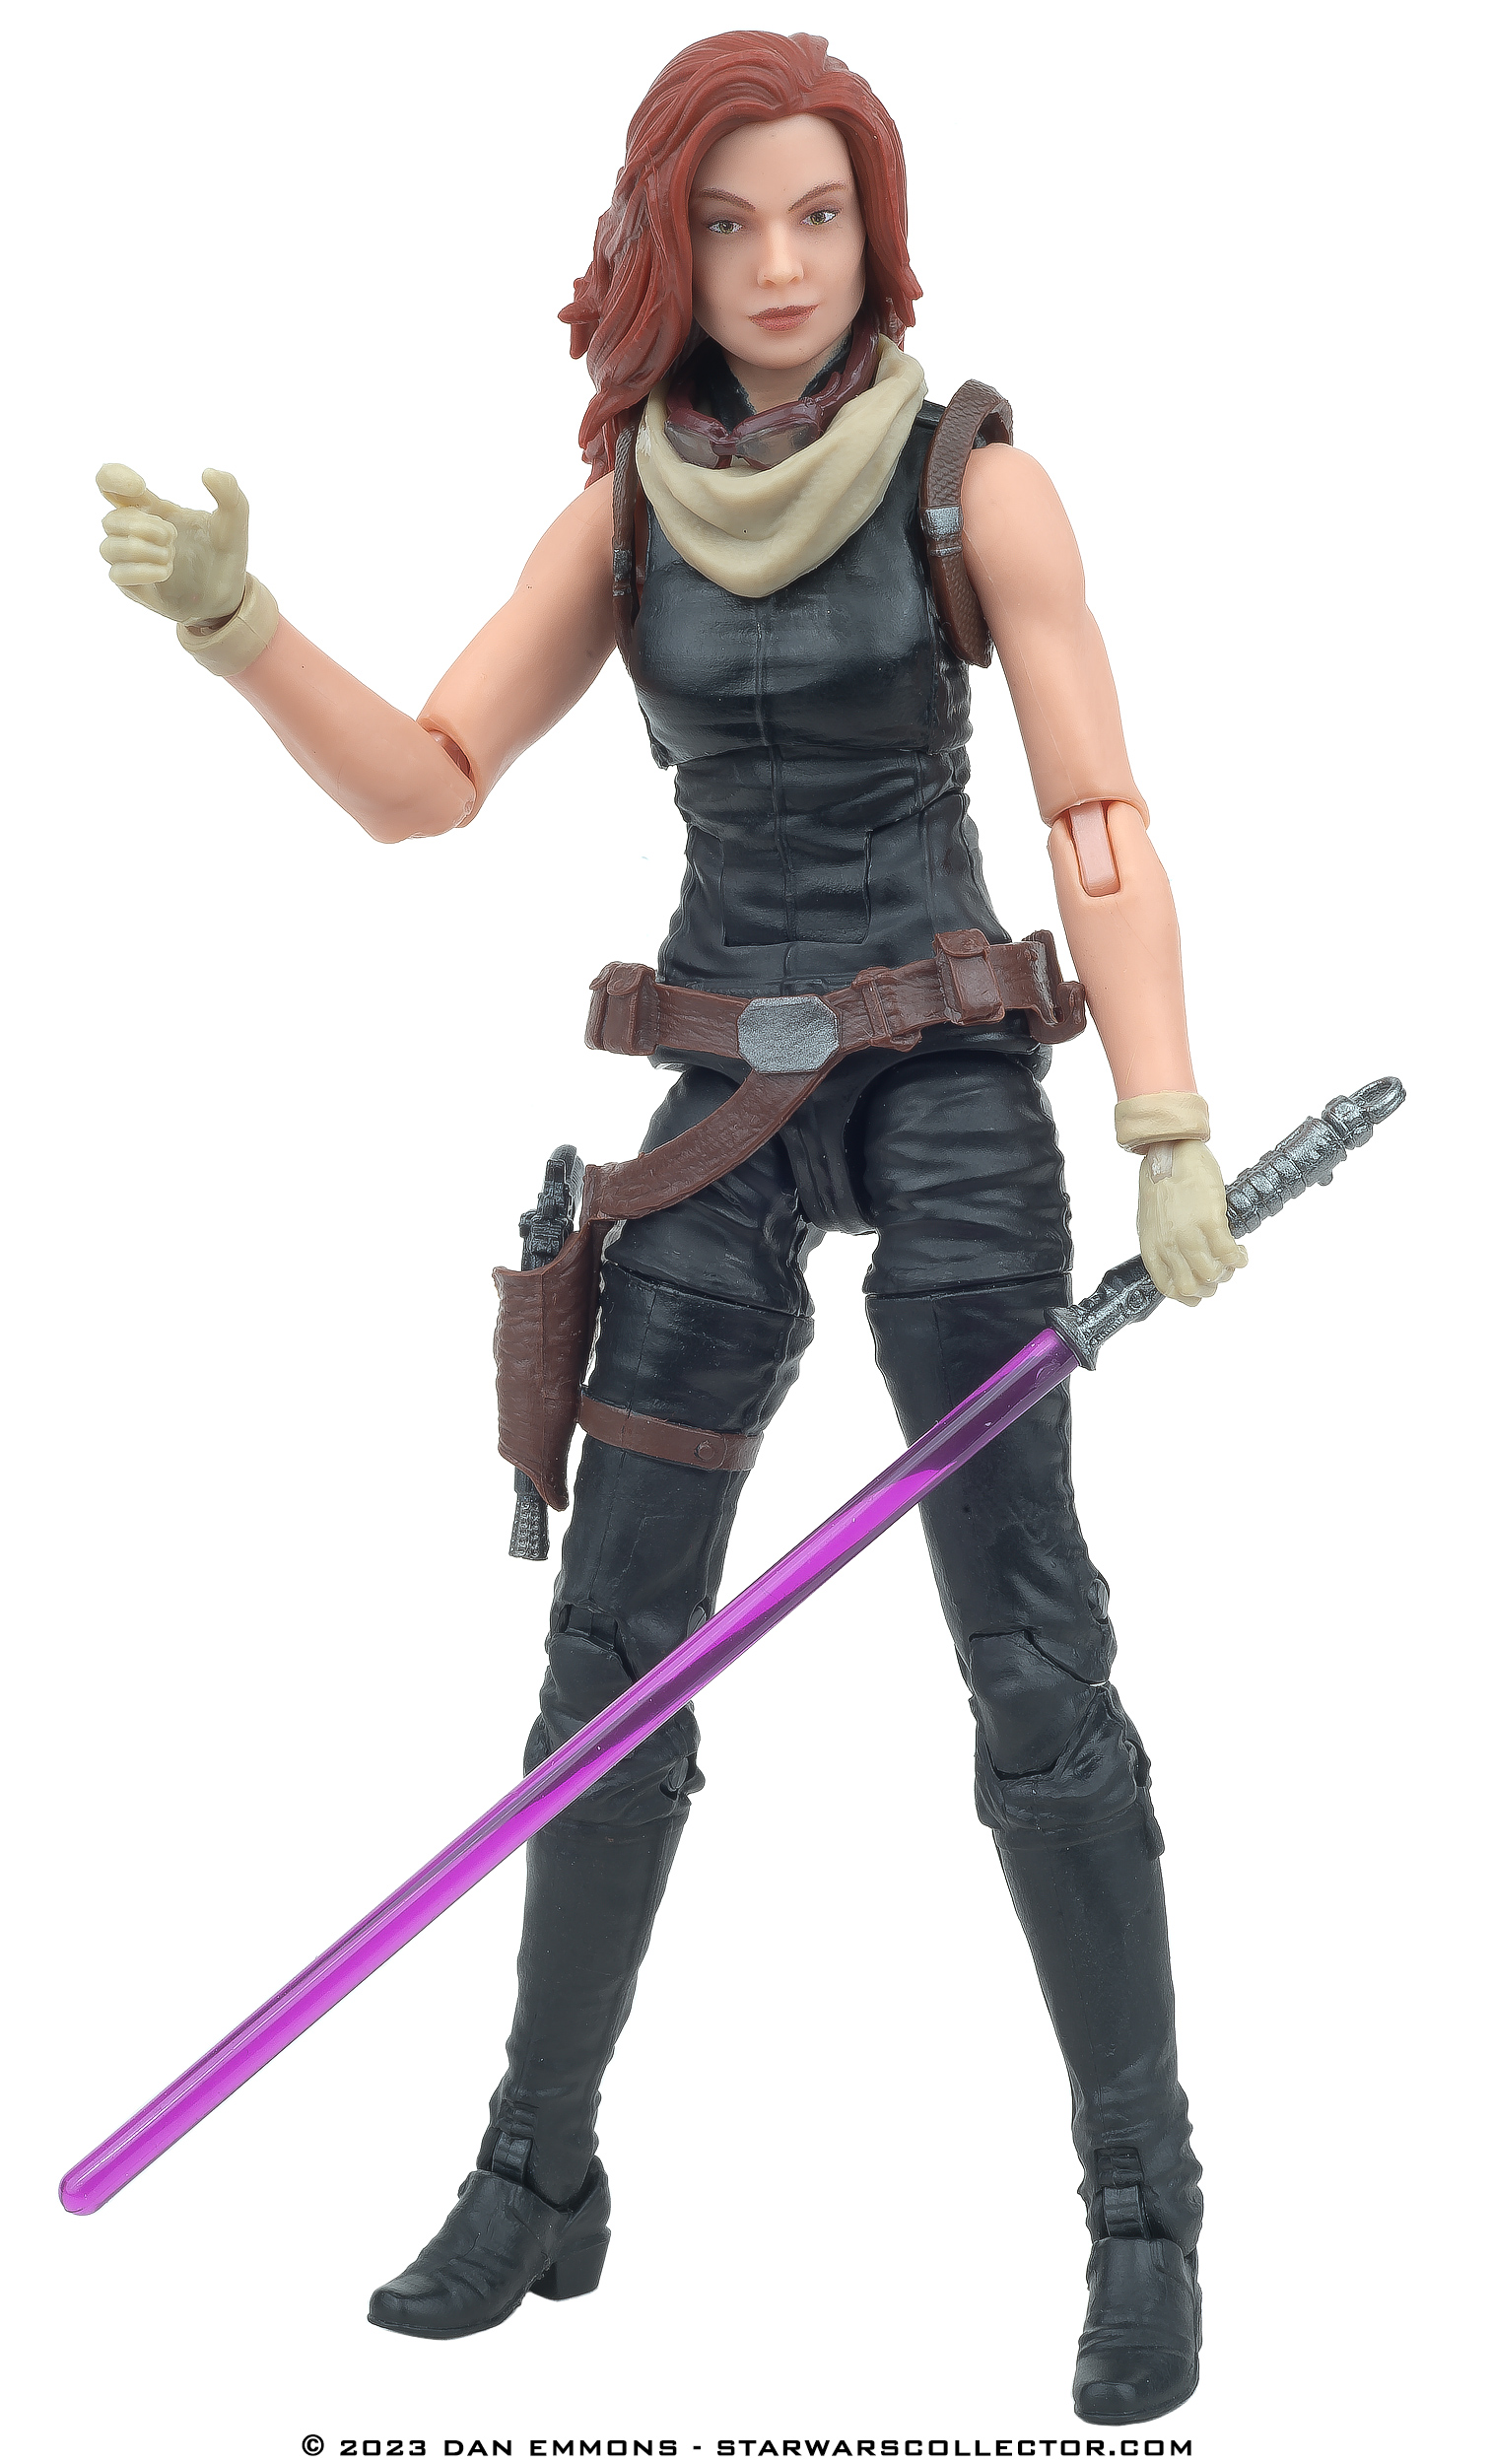 The Black Series 6-Inch - Fan Channel Exclusive - Expanded Universe - Comic Set - Mara Jade